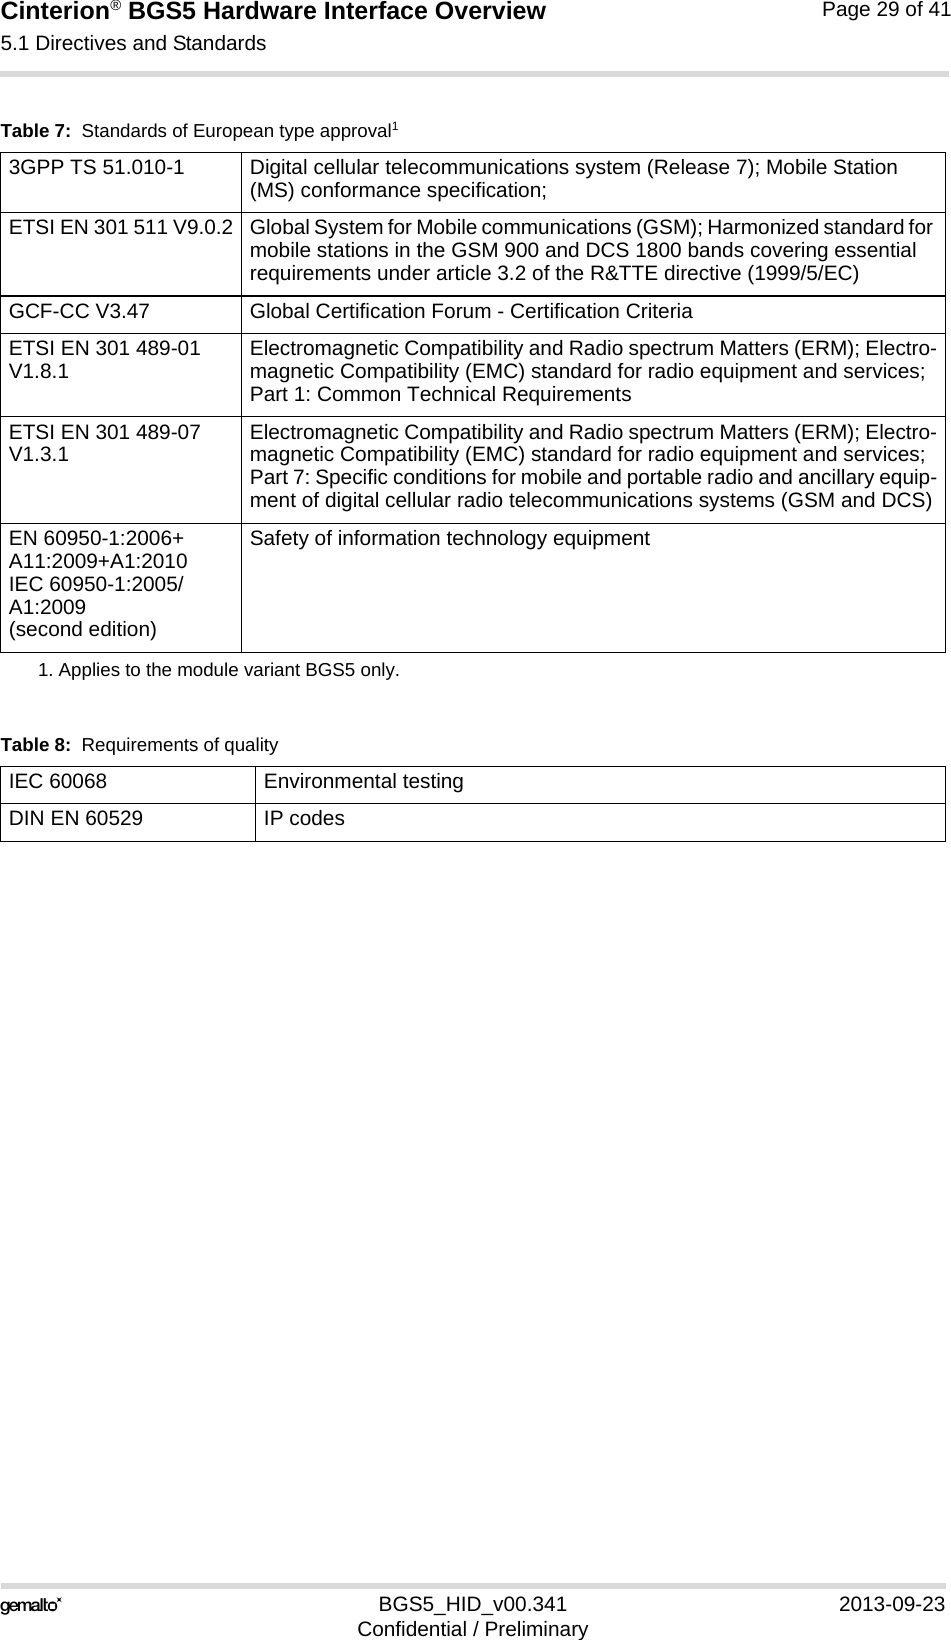 Cinterion® BGS5 Hardware Interface Overview5.1 Directives and Standards33BGS5_HID_v00.341 2013-09-23Confidential / PreliminaryPage 29 of 41Table 7:  Standards of European type approval11. Applies to the module variant BGS5 only.3GPP TS 51.010-1 Digital cellular telecommunications system (Release 7); Mobile Station (MS) conformance specification;ETSI EN 301 511 V9.0.2 Global System for Mobile communications (GSM); Harmonized standard for mobile stations in the GSM 900 and DCS 1800 bands covering essential requirements under article 3.2 of the R&amp;TTE directive (1999/5/EC)GCF-CC V3.47  Global Certification Forum - Certification CriteriaETSI EN 301 489-01 V1.8.1 Electromagnetic Compatibility and Radio spectrum Matters (ERM); Electro-magnetic Compatibility (EMC) standard for radio equipment and services; Part 1: Common Technical RequirementsETSI EN 301 489-07 V1.3.1 Electromagnetic Compatibility and Radio spectrum Matters (ERM); Electro-magnetic Compatibility (EMC) standard for radio equipment and services; Part 7: Specific conditions for mobile and portable radio and ancillary equip-ment of digital cellular radio telecommunications systems (GSM and DCS)EN 60950-1:2006+ A11:2009+A1:2010IEC 60950-1:2005/A1:2009 (second edition)Safety of information technology equipmentTable 8:  Requirements of qualityIEC 60068 Environmental testingDIN EN 60529 IP codes